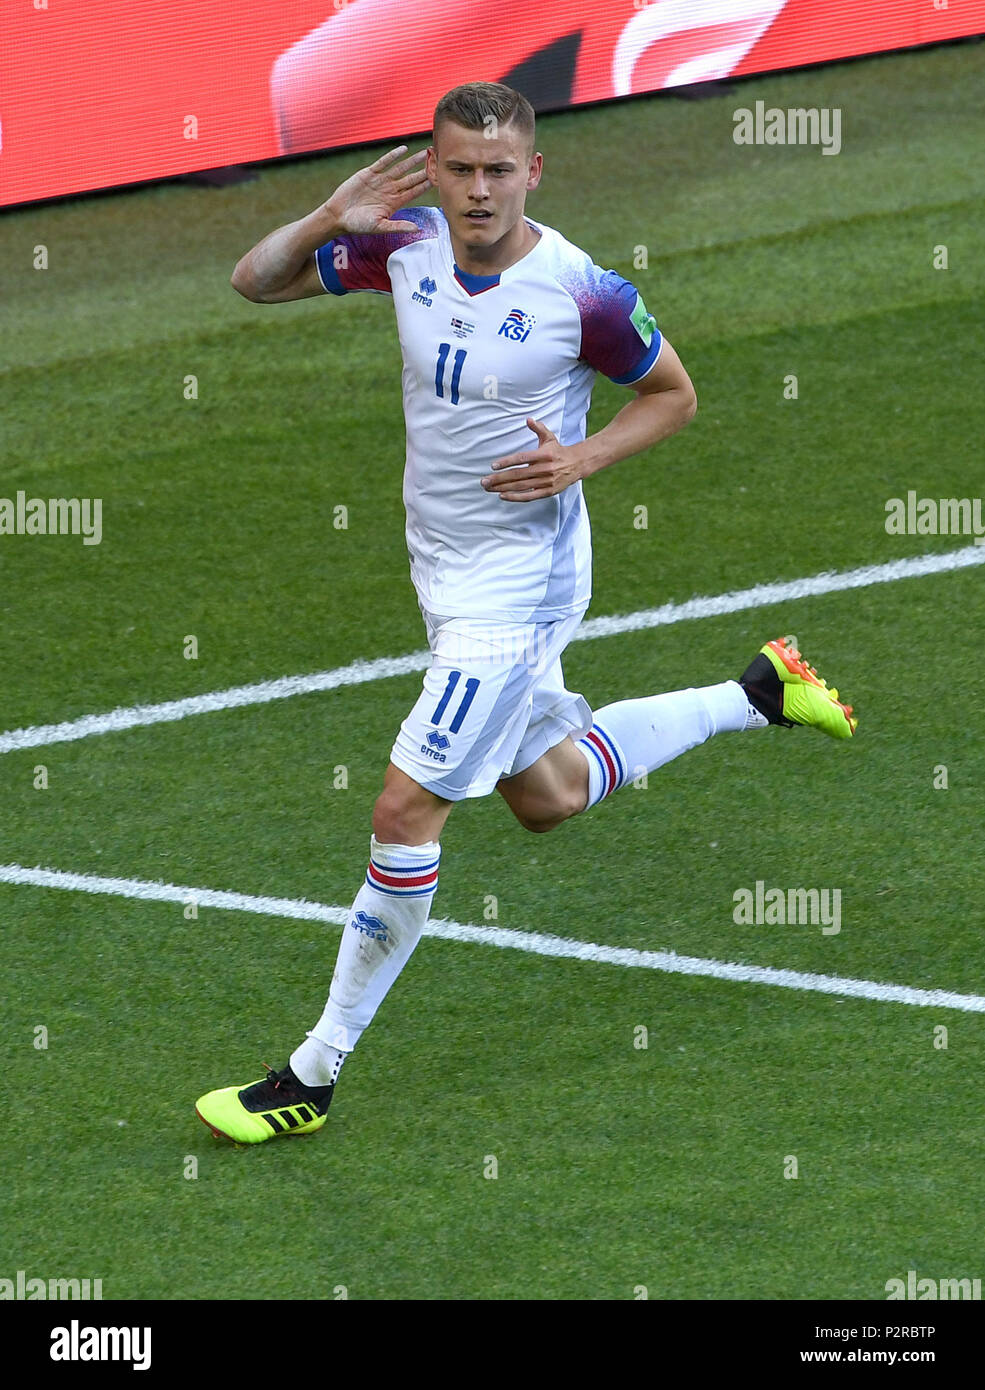 Moscow, Russia. 16th June, 2018. Alfred Finnbogason of Iceland celebrates scoring during a group D match between Argentina and Iceland at the 2018 FIFA World Cup in Moscow, Russia, June 16, 2018. Credit: Wang Yuguo/Xinhua/Alamy Live News Stock Photo